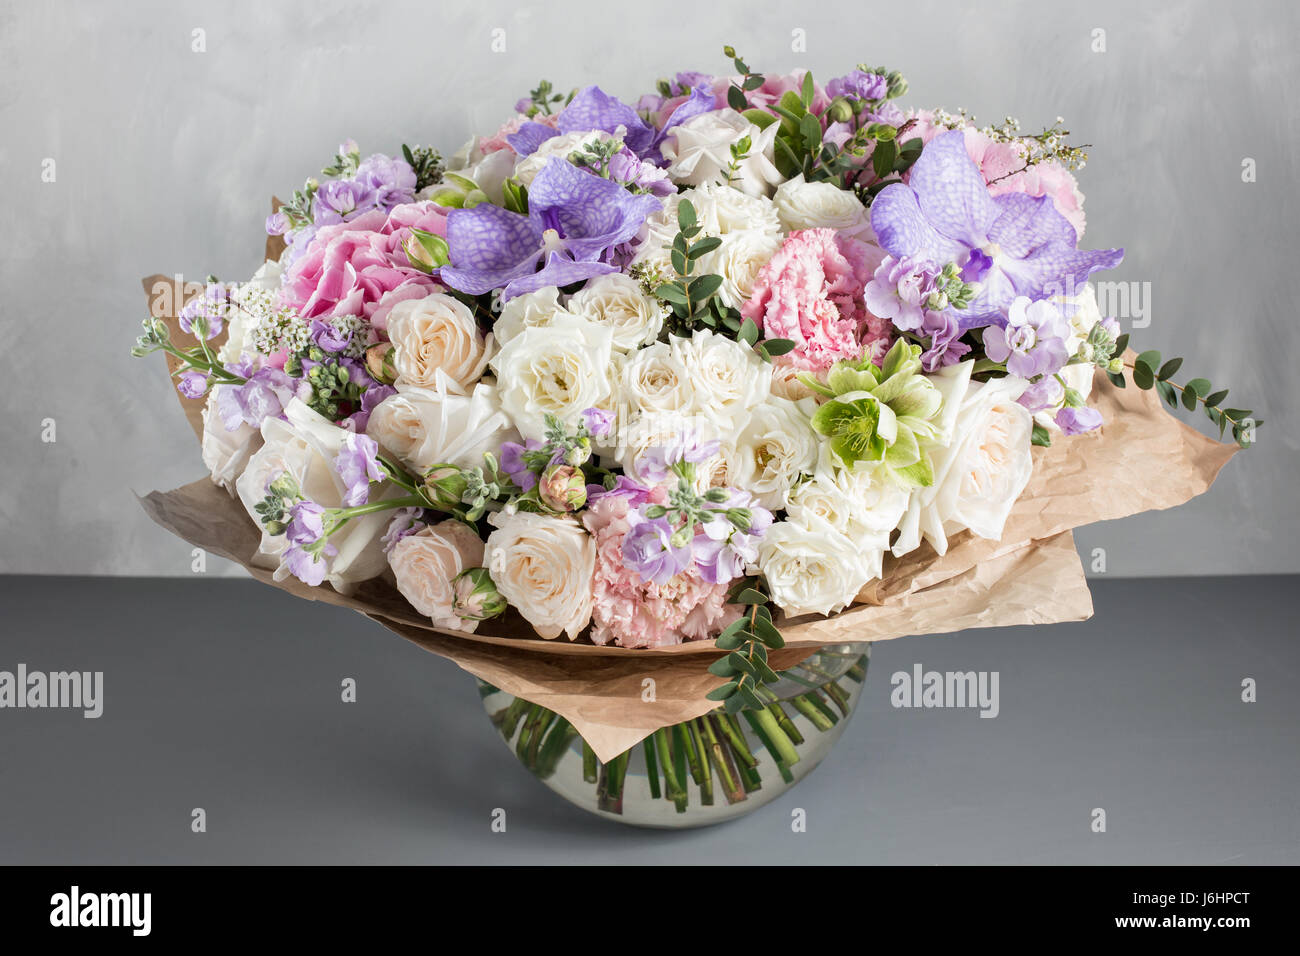 luxurious and elegant bouquet of roses and Other colors flowers on wooden gray background, copy space. Stock Photo